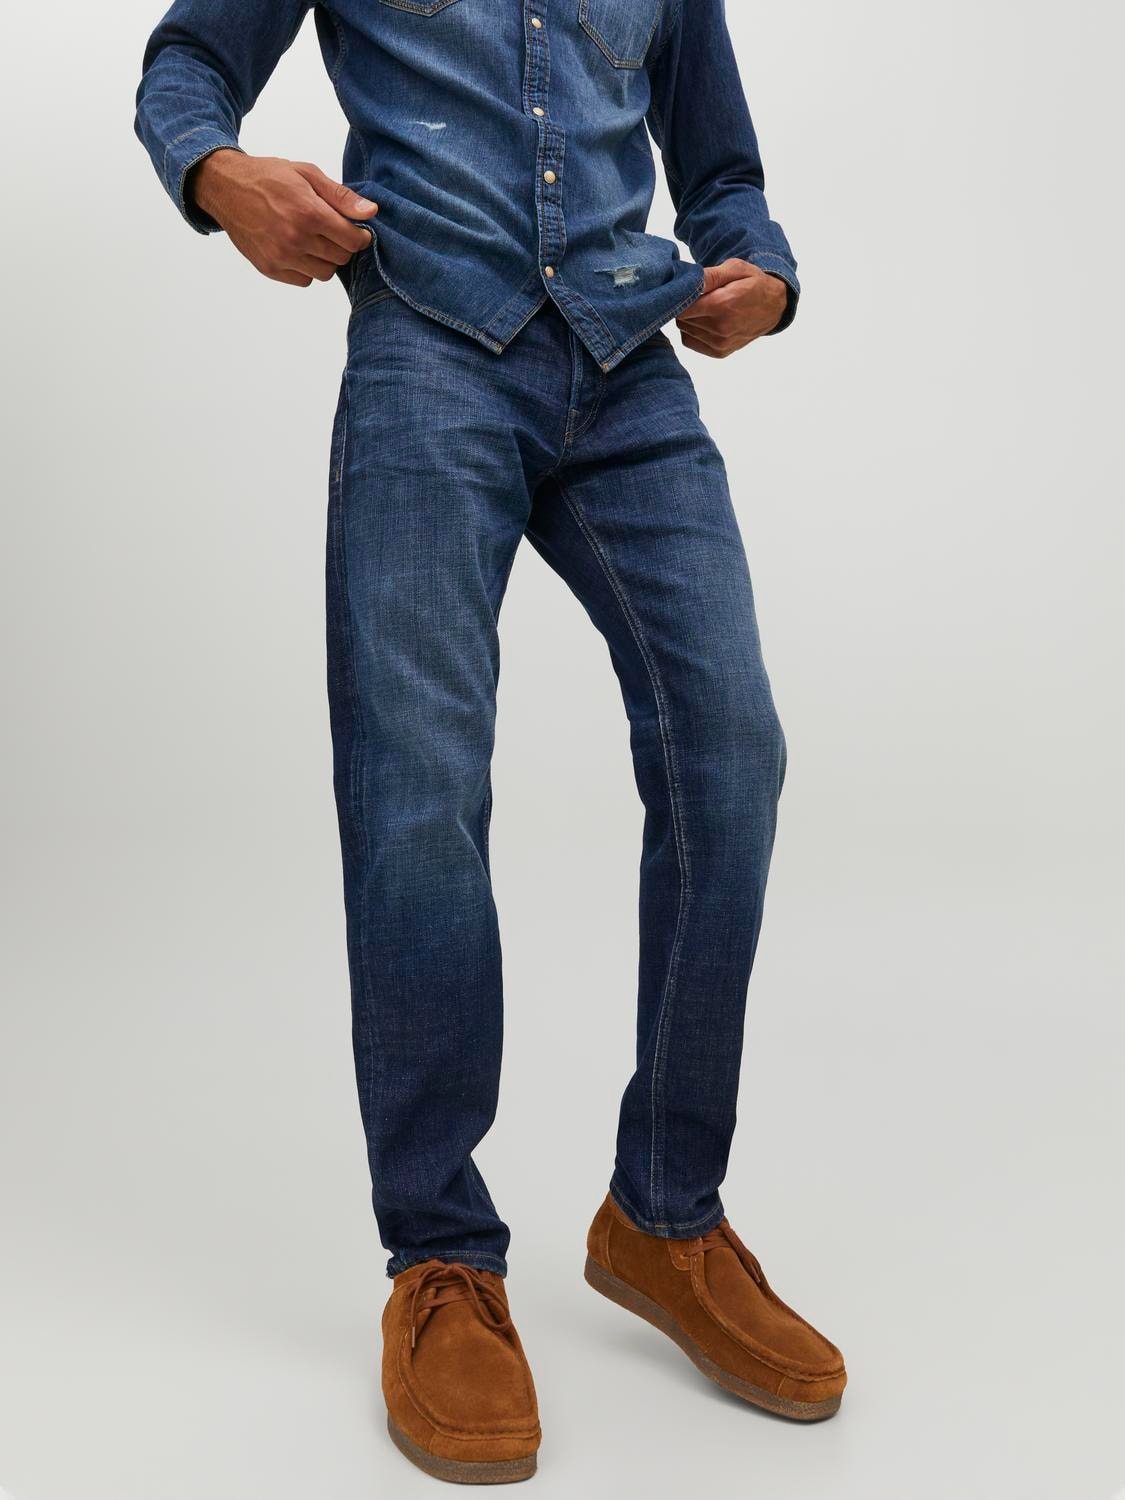 Mike 211 Comfort Fit Jeans